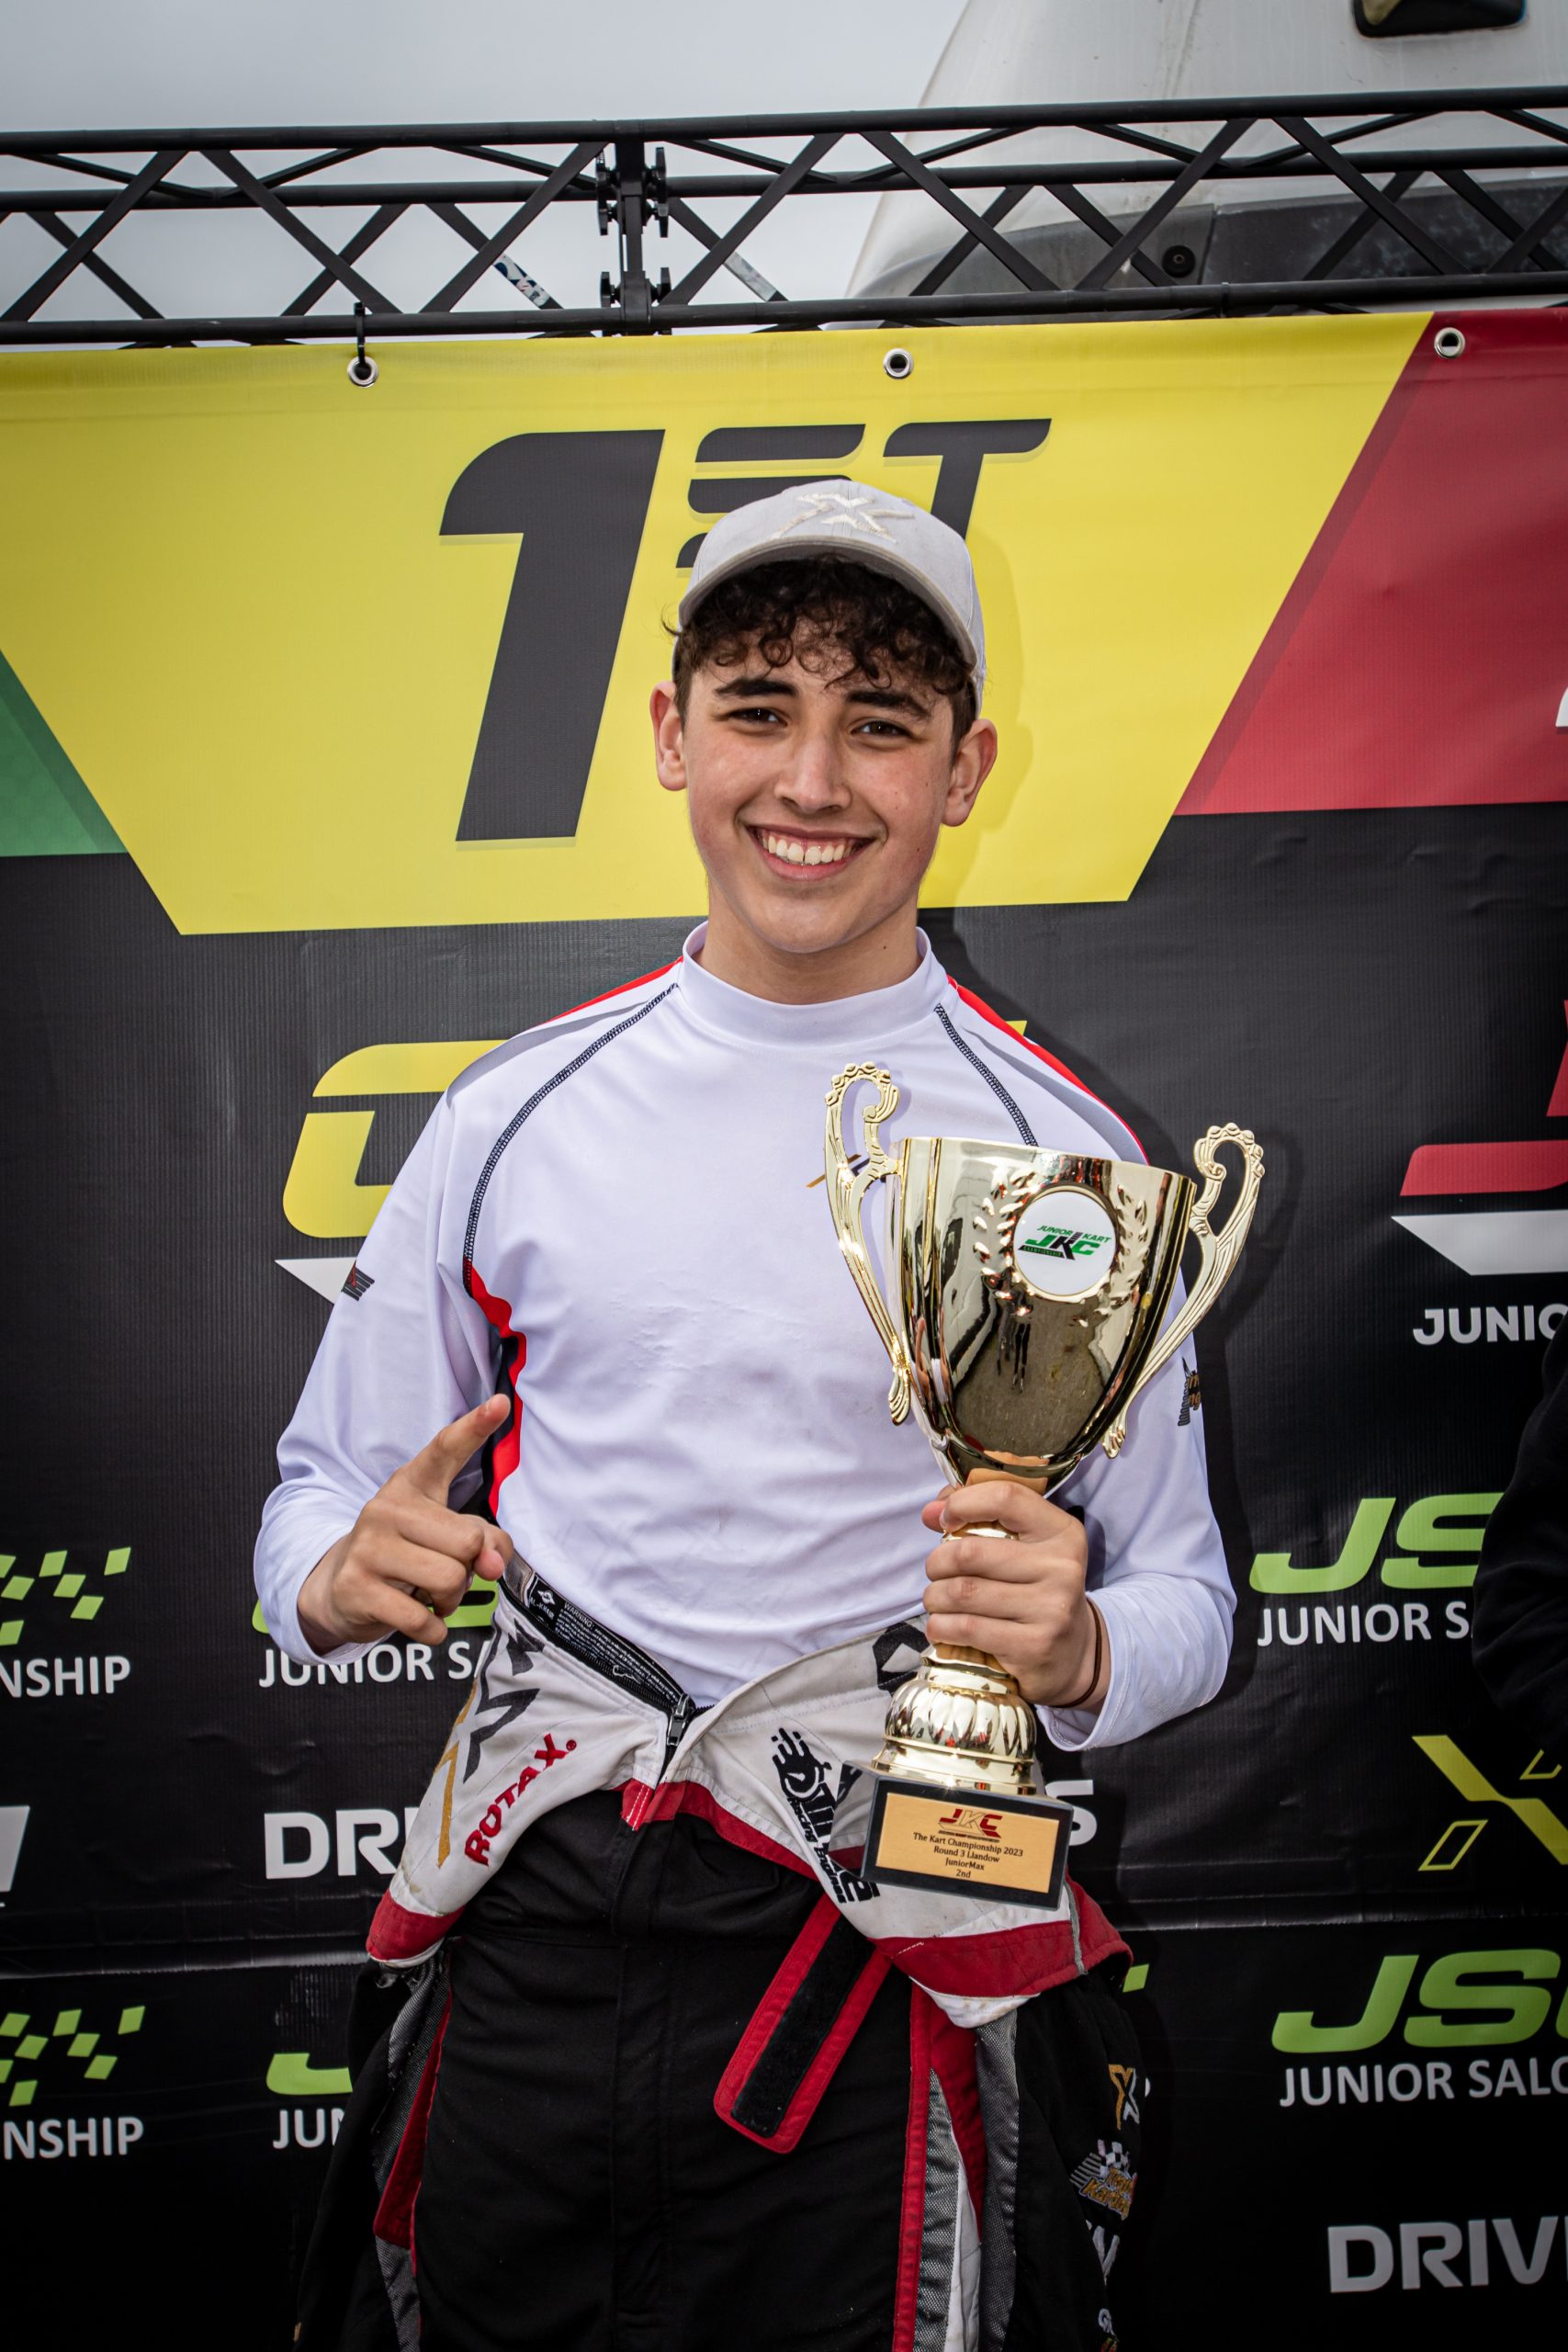 Harry Hurst-Grover, HHG 14 takes the top spot at the JKC